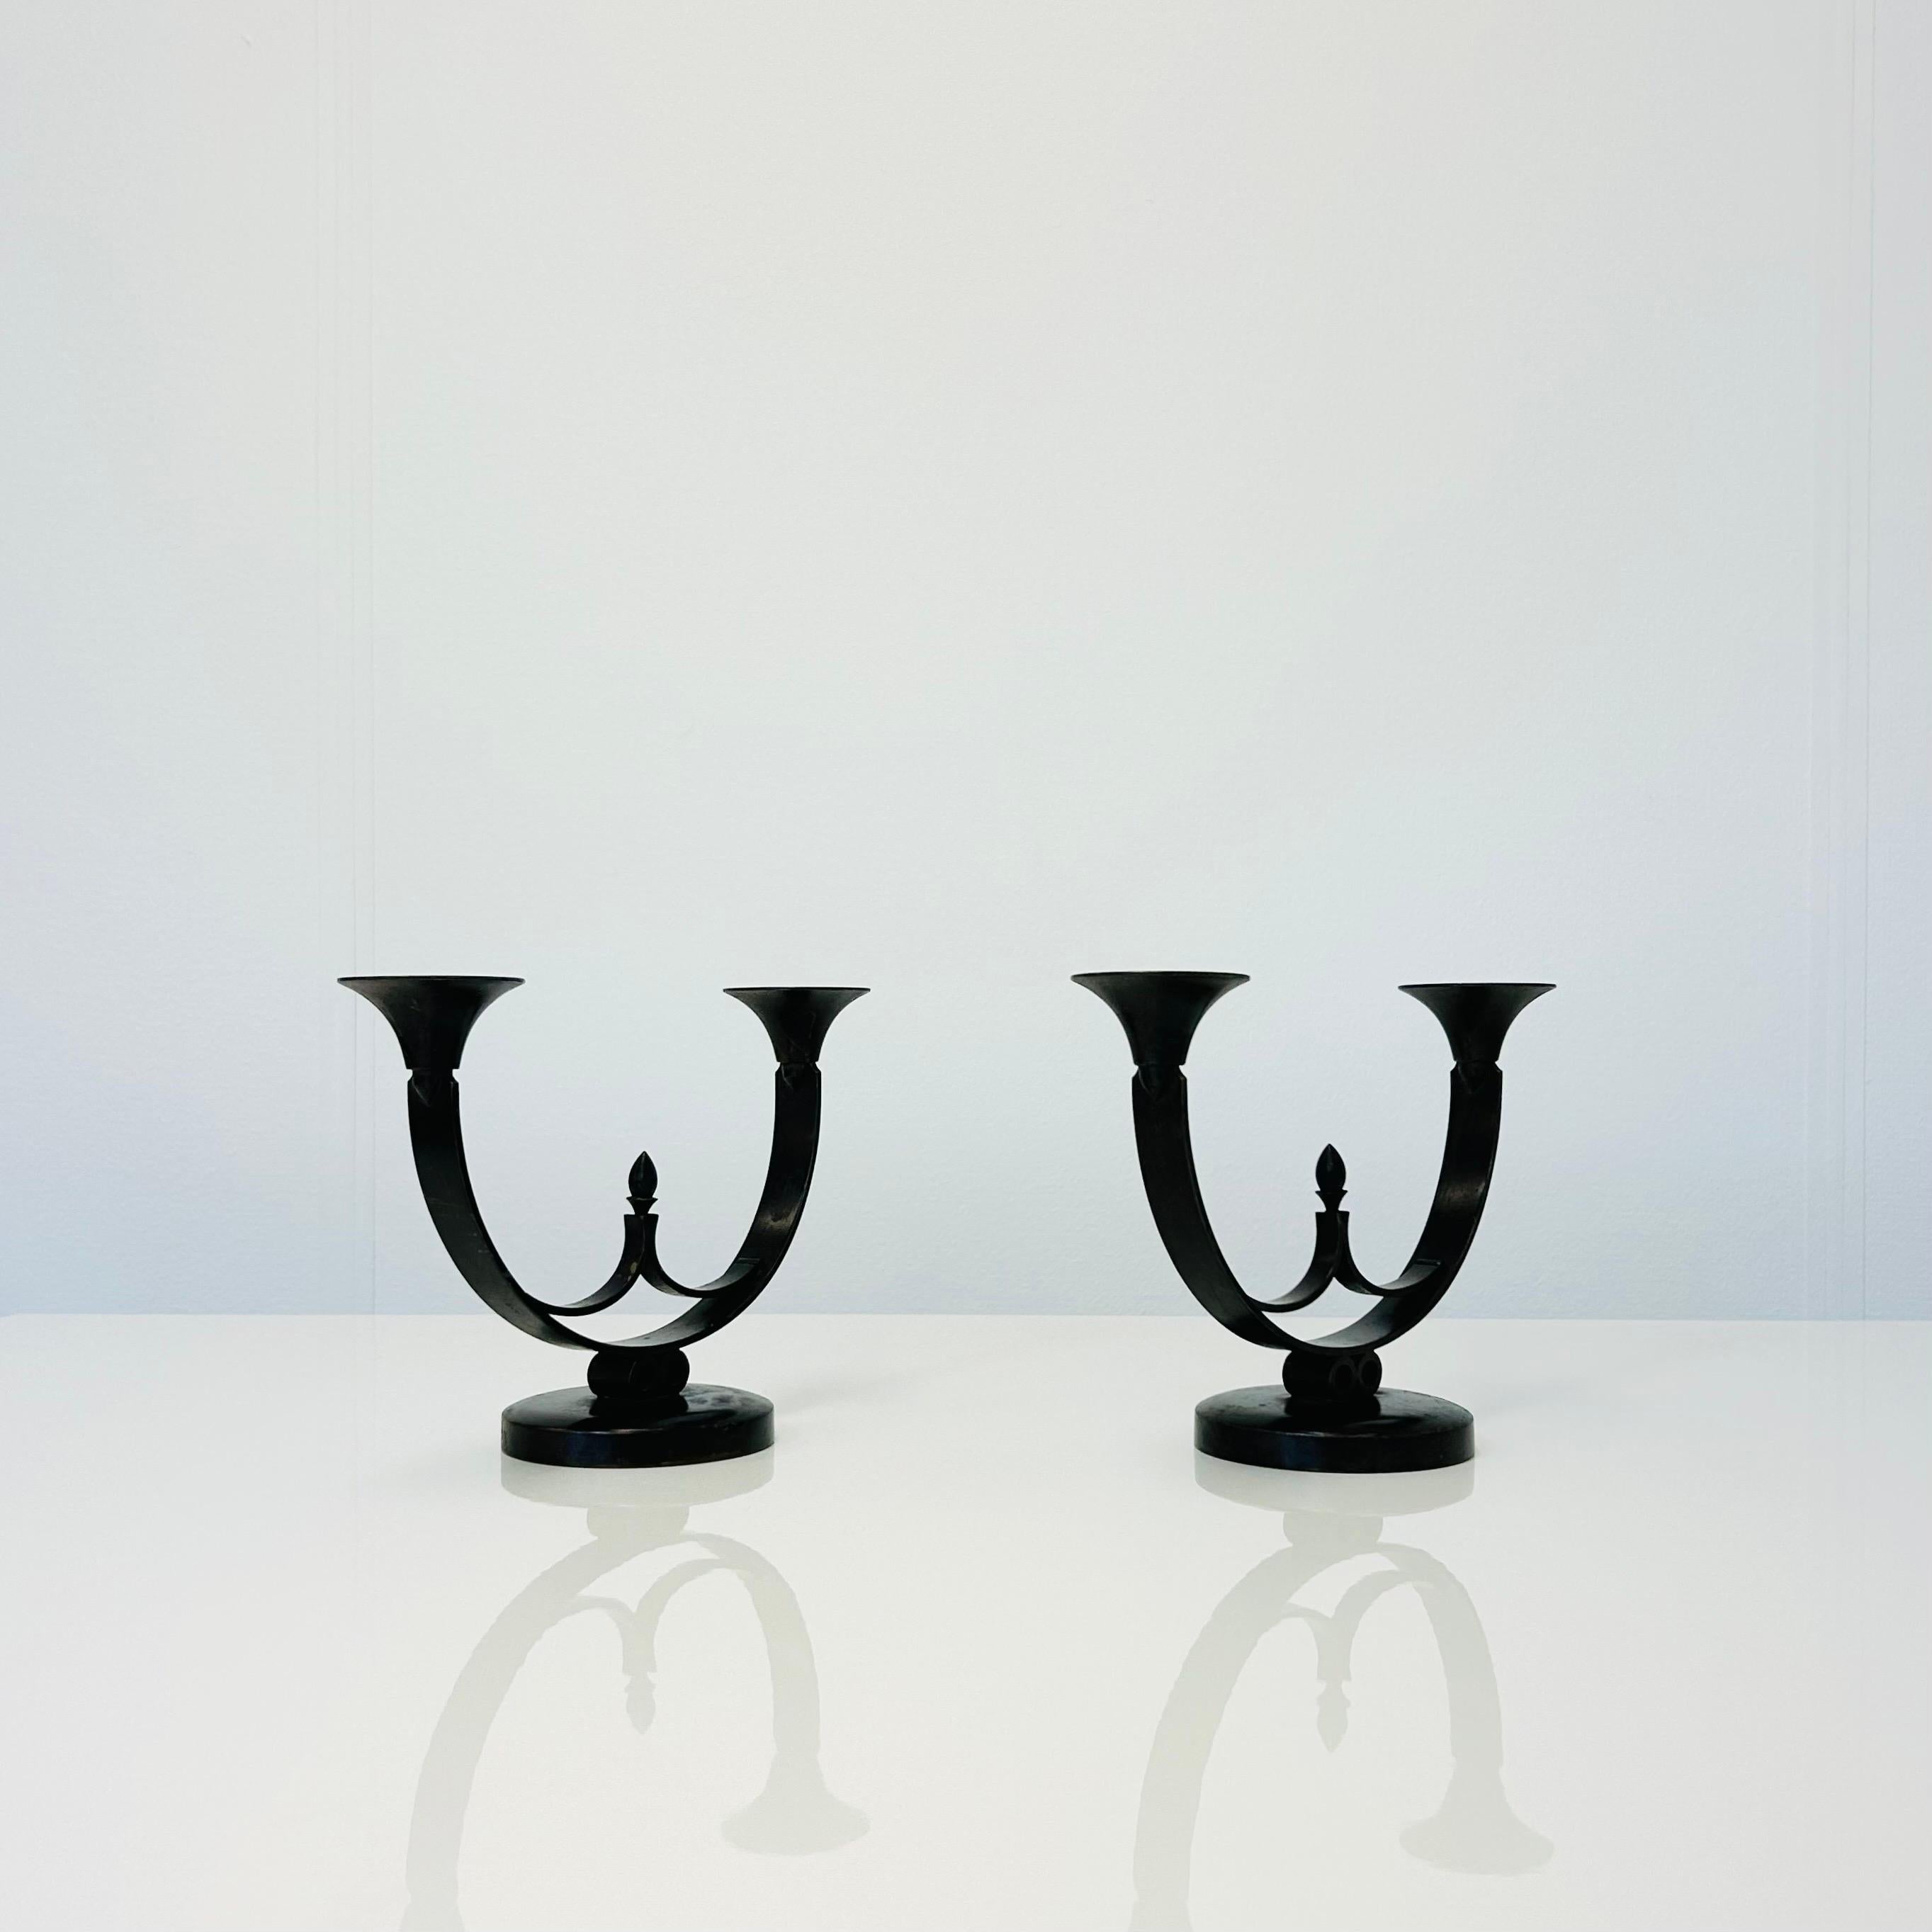 Pair of Light Bronze Candle Holders by Just Andersen, 1930s, Denmark For Sale 7